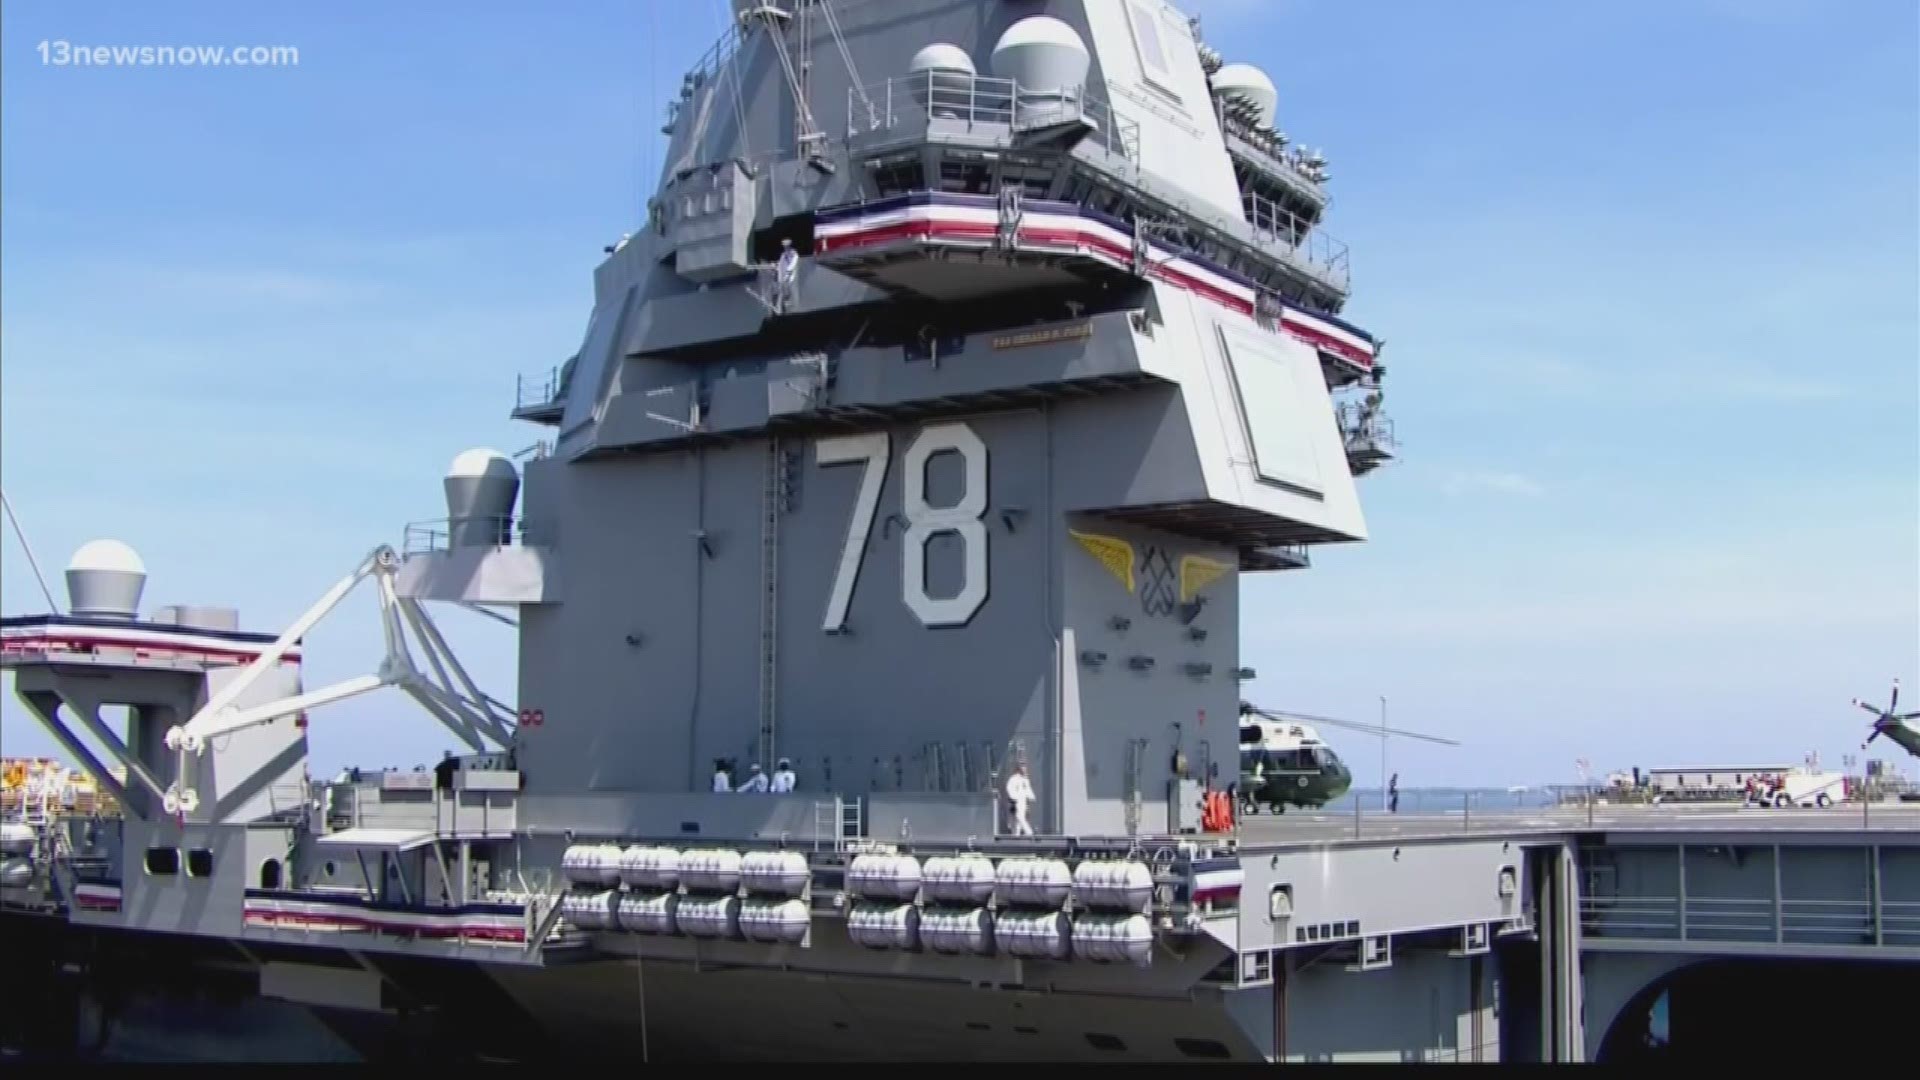 A defense spending bill passed this week in the Senate means good news for Hampton Roads!